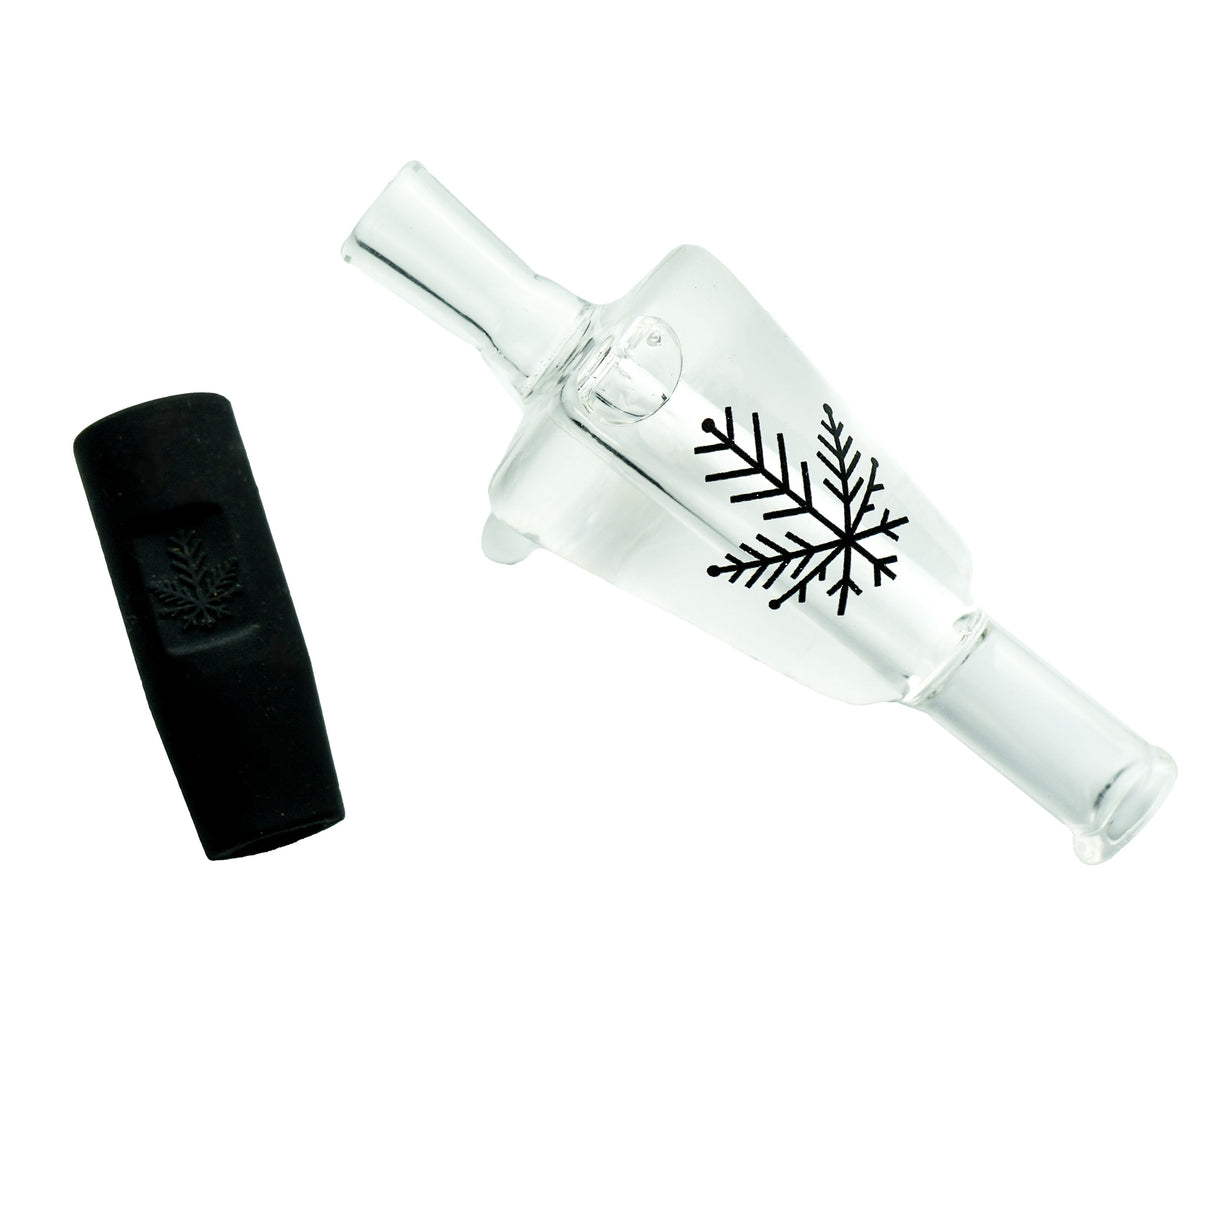 Freeze Pipe Glycerin Blunt Tip with snowflake design and black cap, isolated on white background